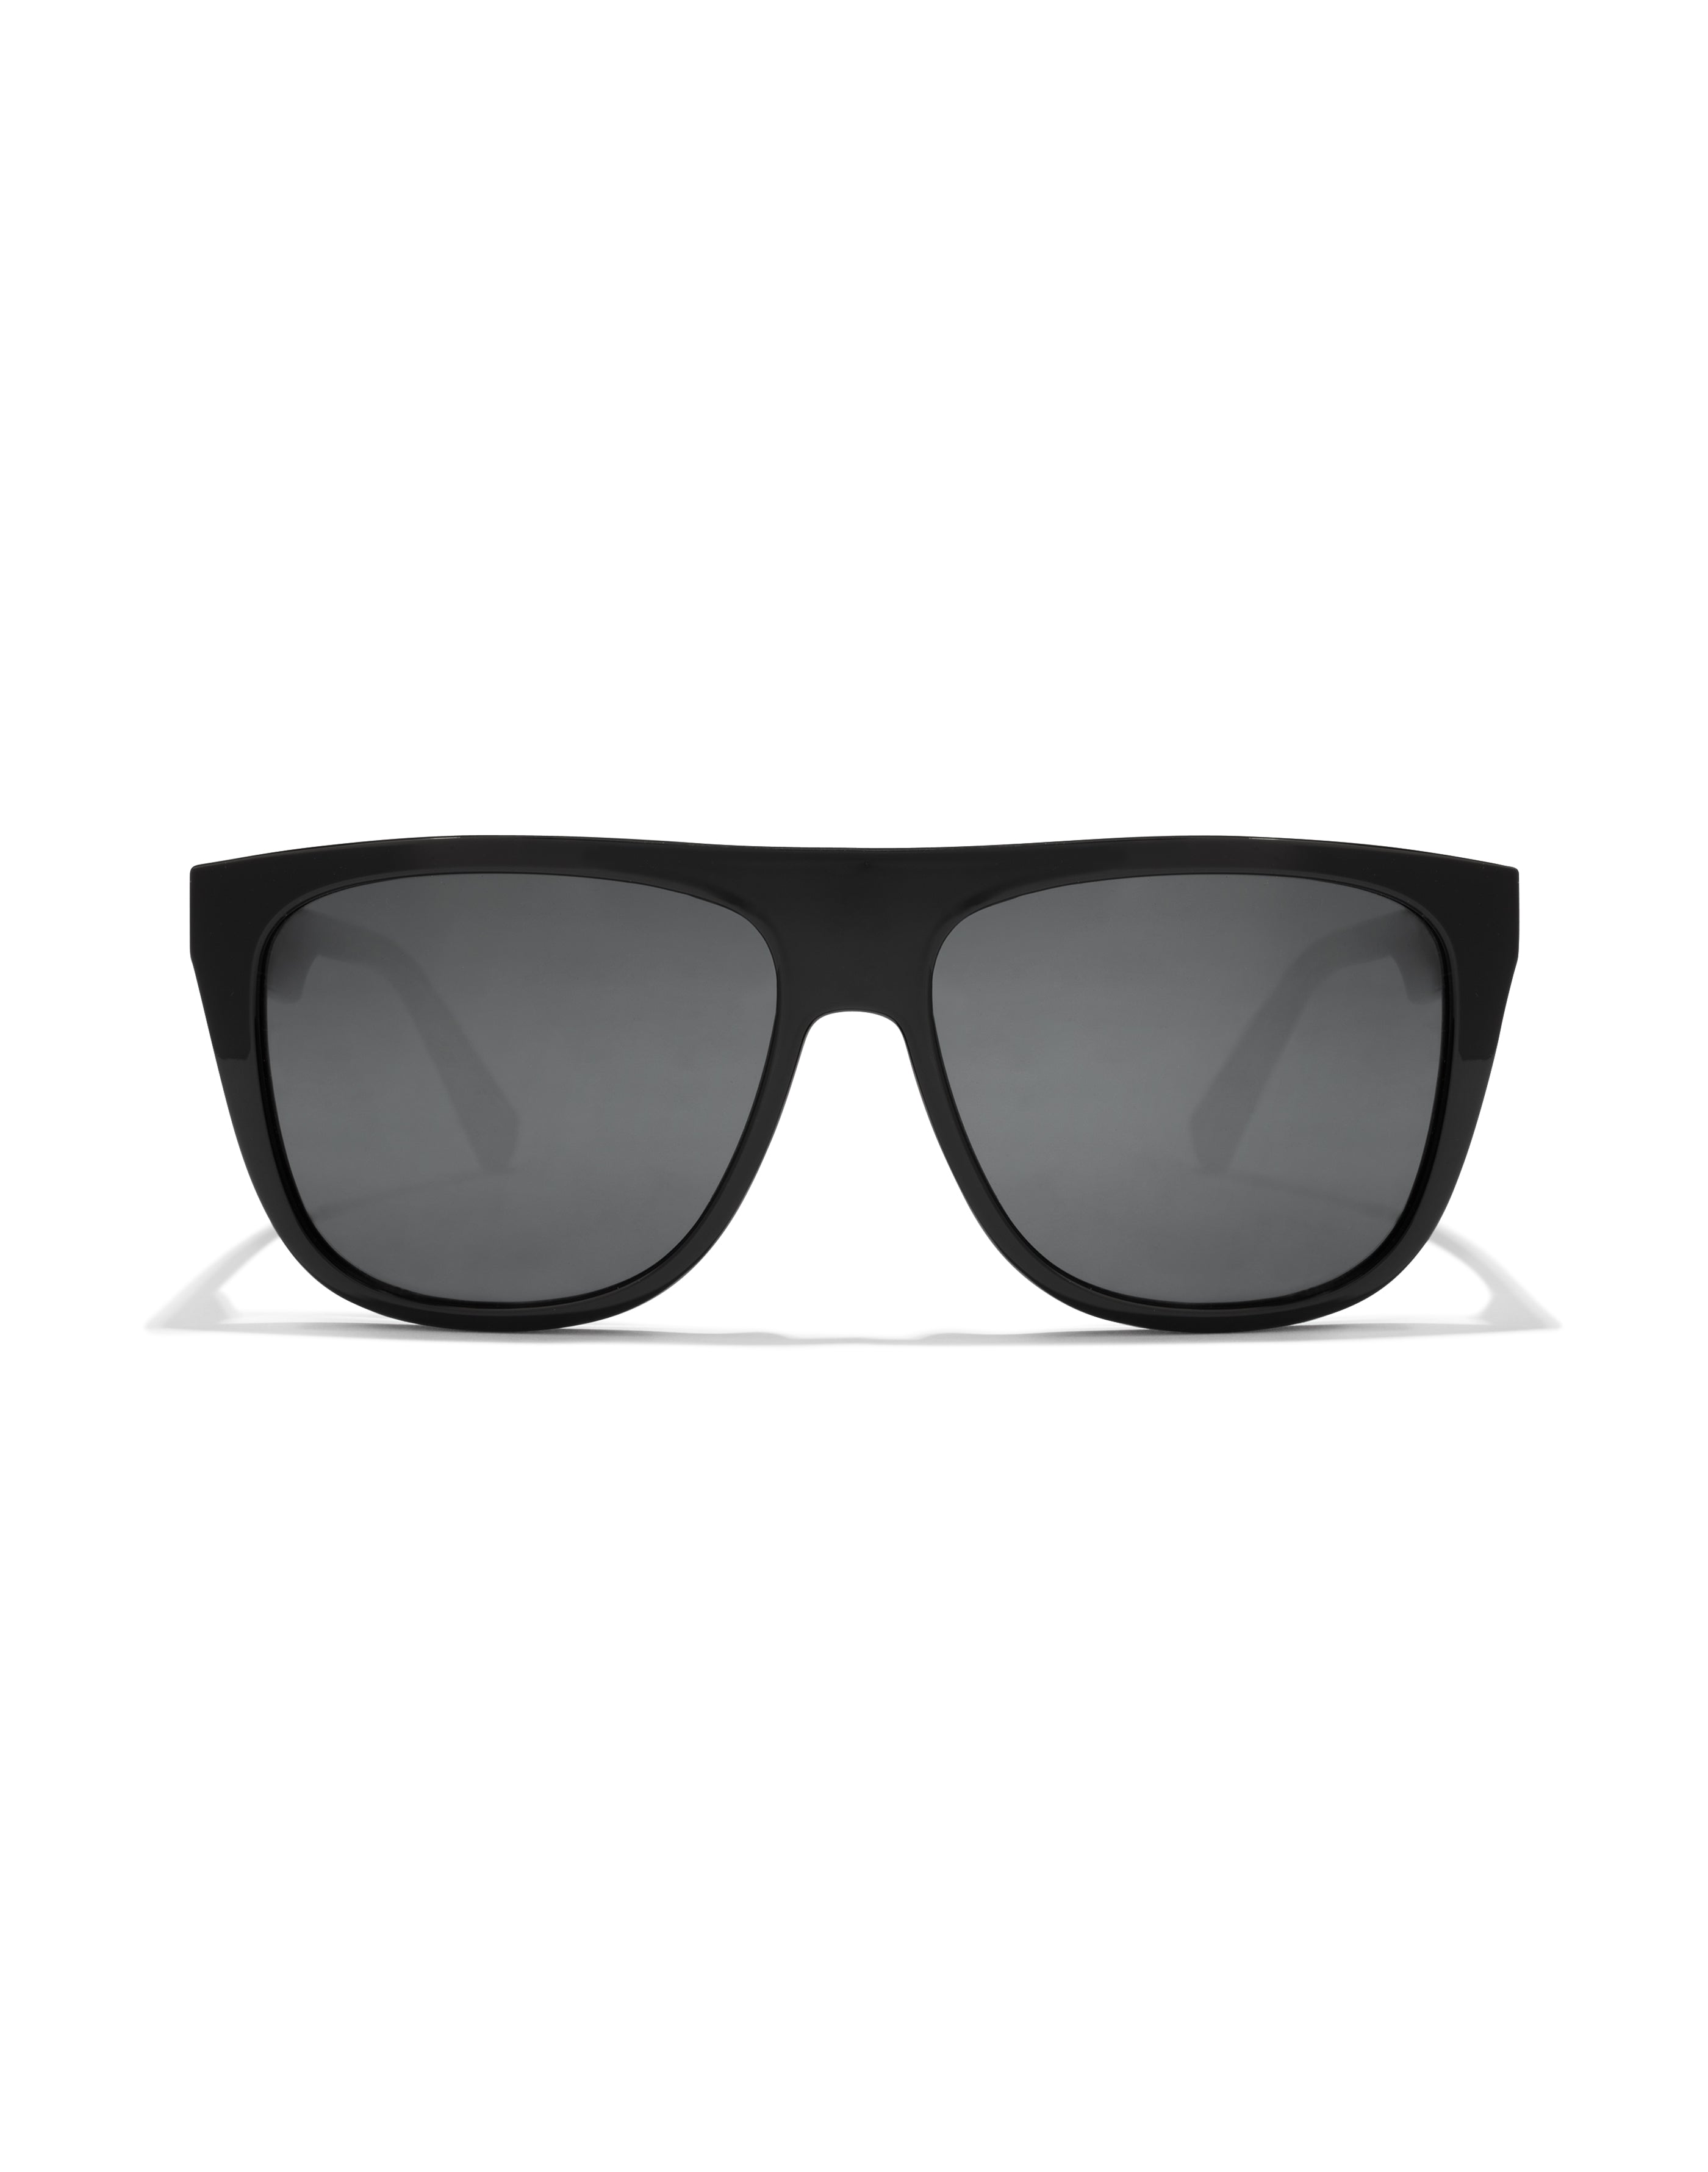 HAWKERS - RUNWAY POLARIZED Black For Men and Women UV400